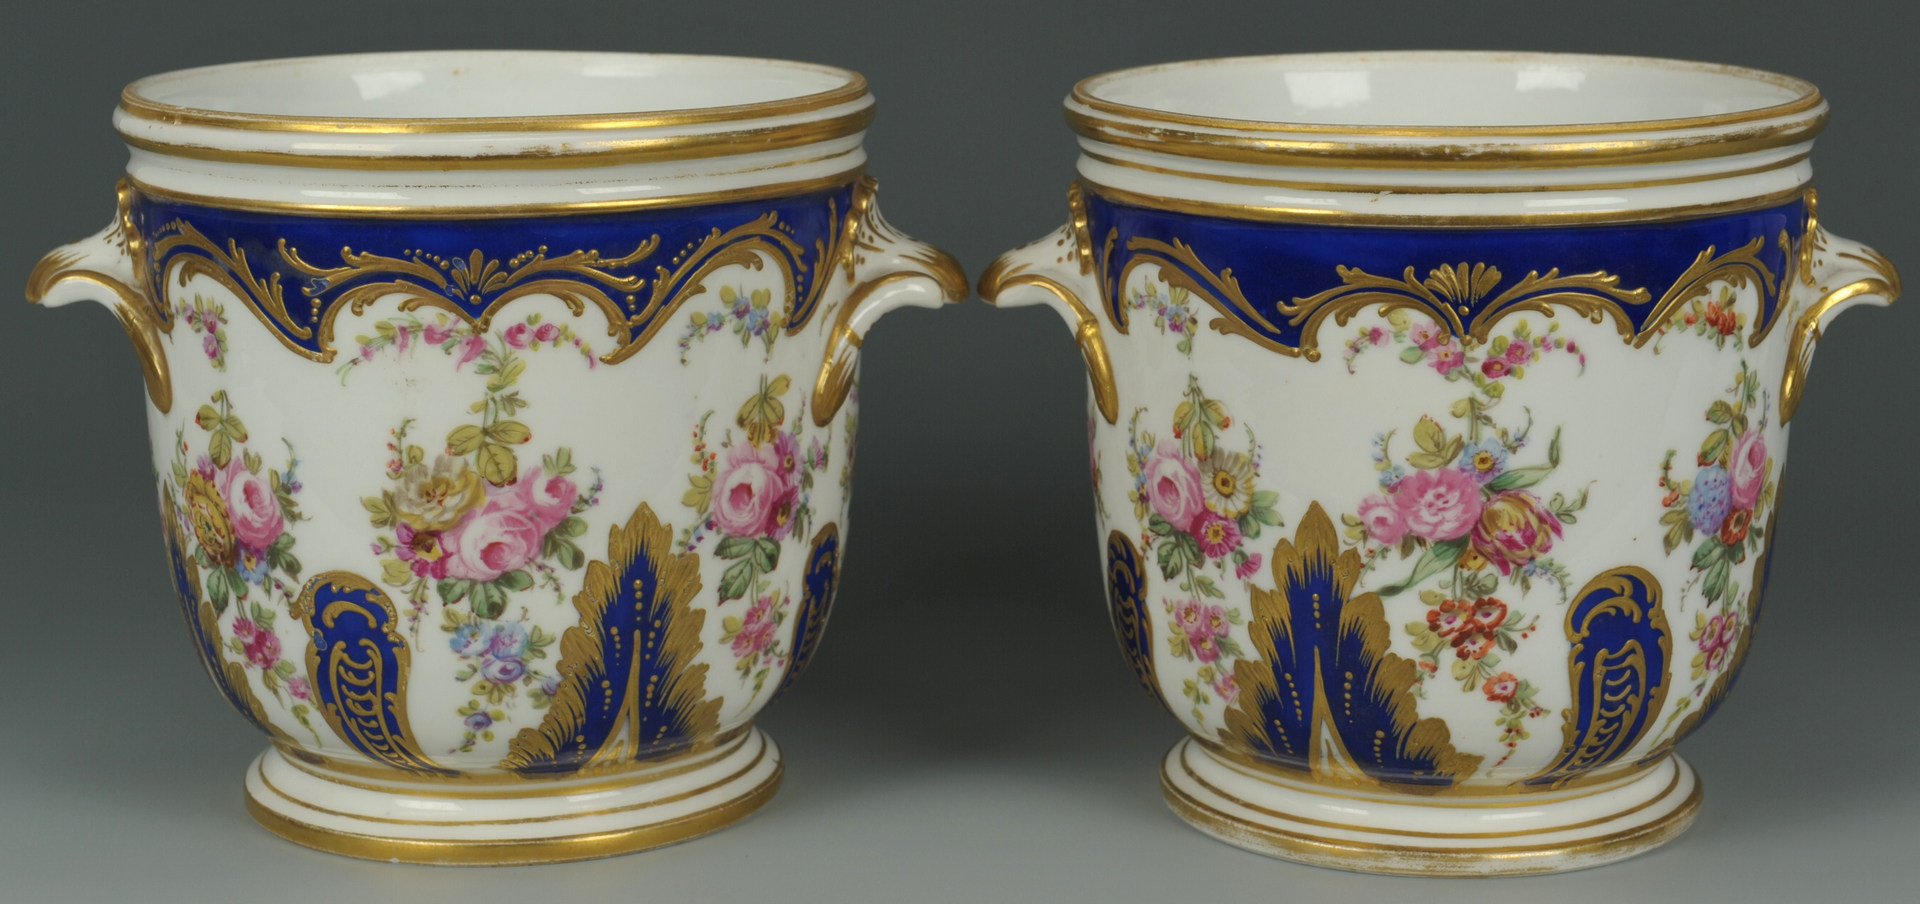 Lot 248: Pair of Sevres style porcelain jardinieres